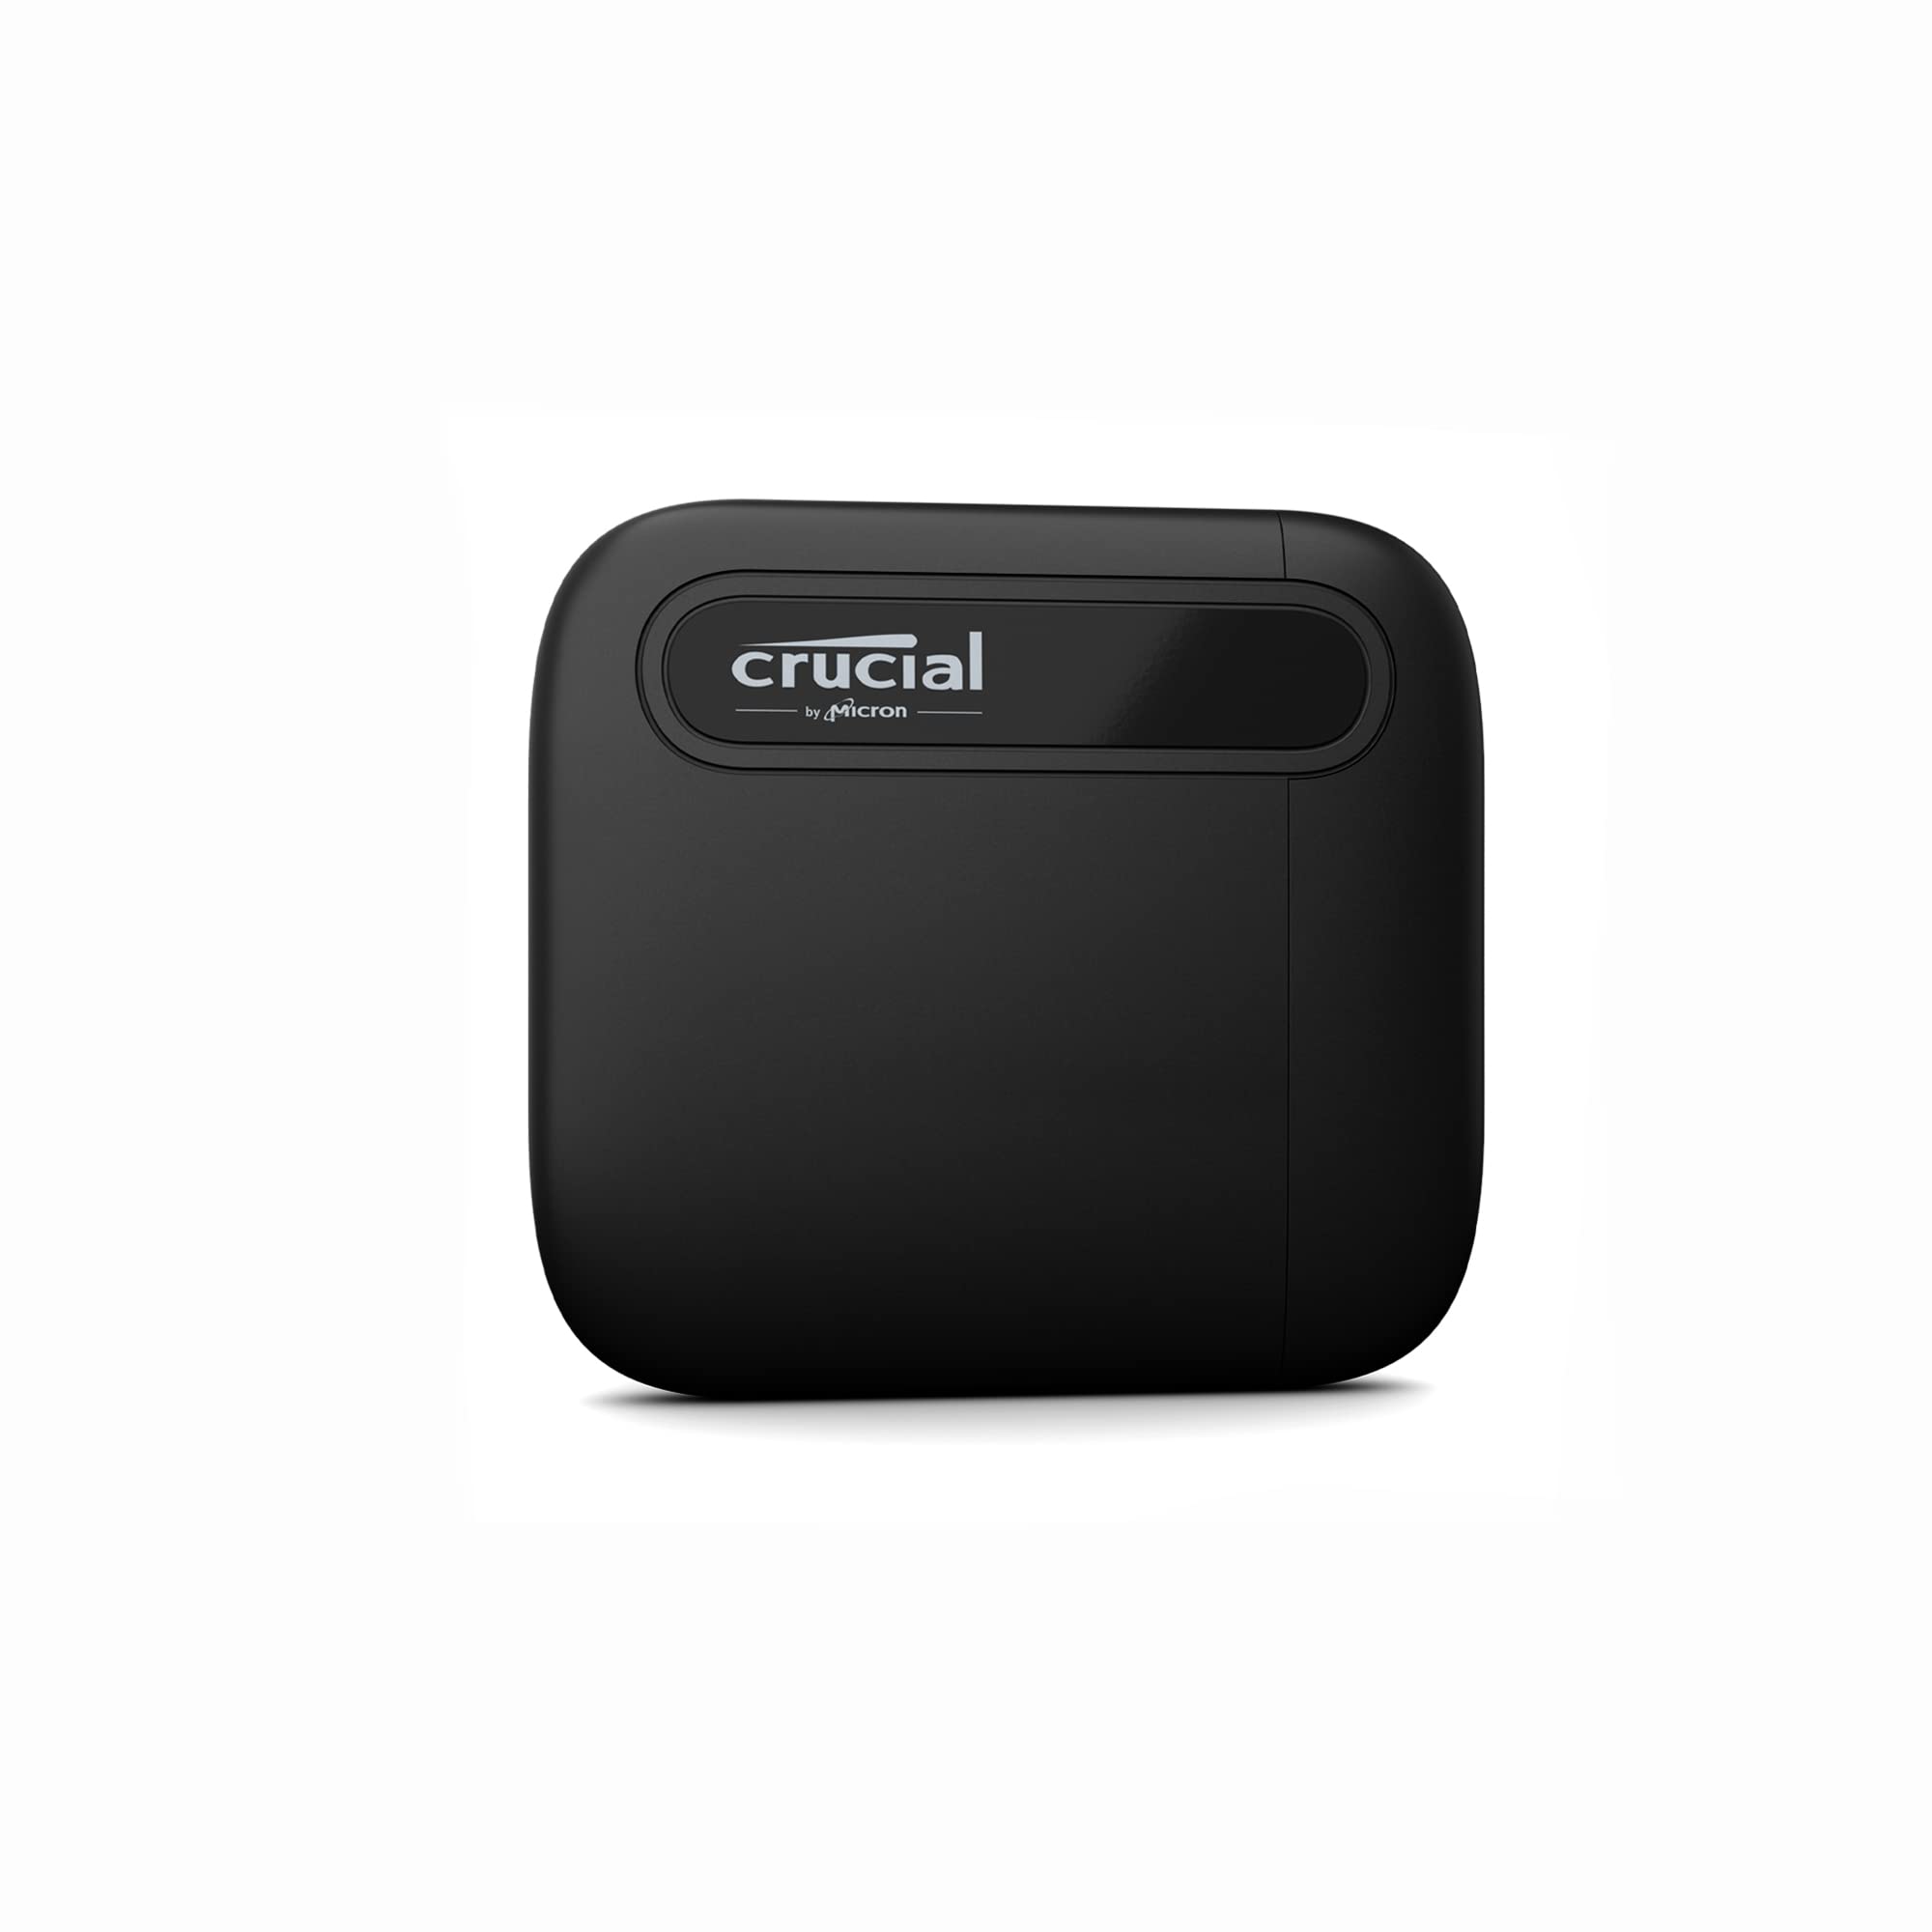 1TB Crucial X6 USB 3.2 Type-C Portable External Solid State Drive (CT1000X6SSD9) $55 + Free Shipping